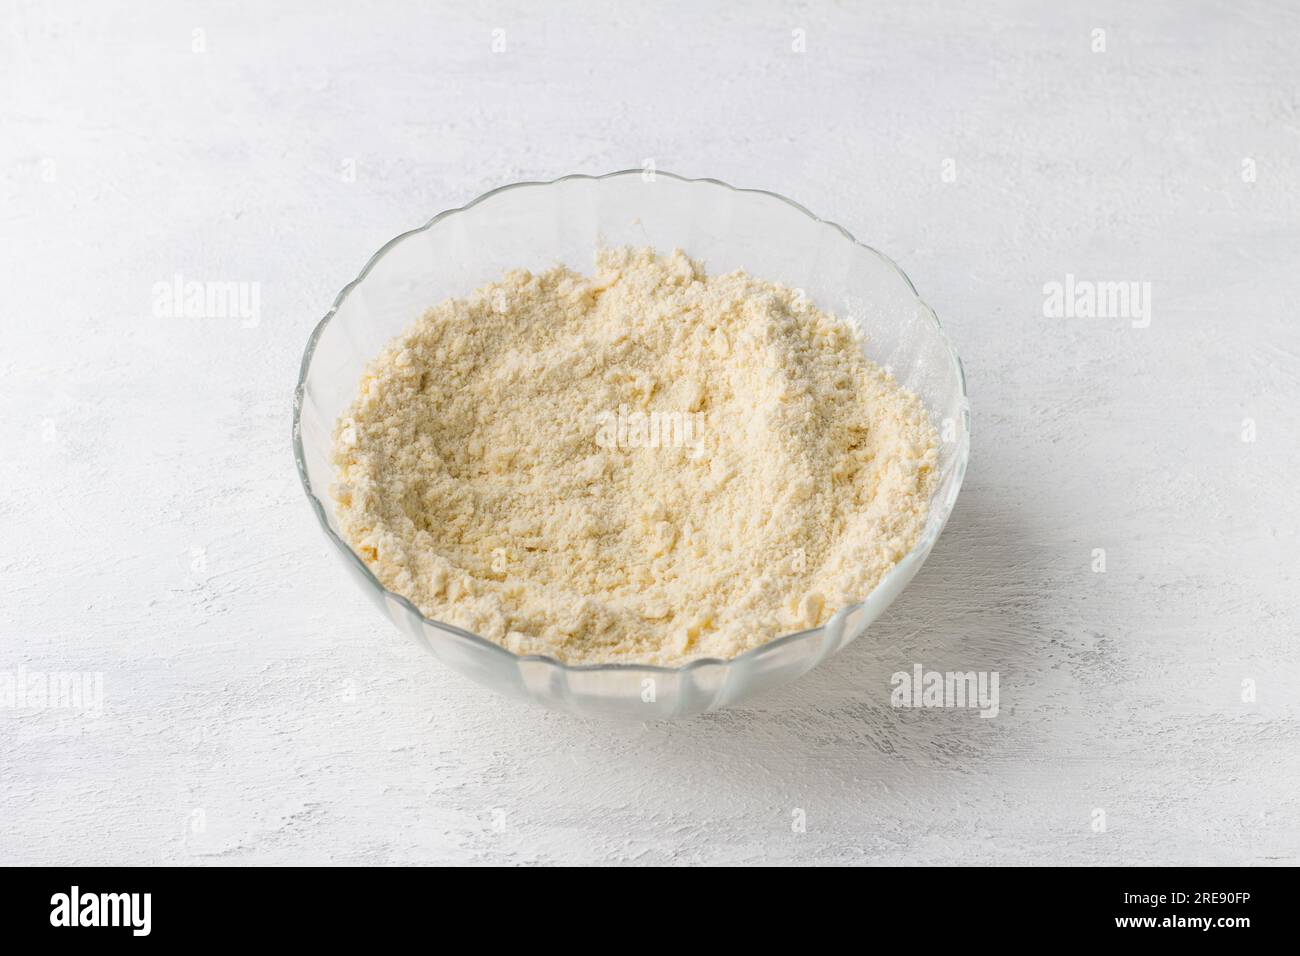 A glass bowl of grated butter with flour on a light gray background. Cooking delicious homemade pastries, step by step, cooking step. Stock Photo